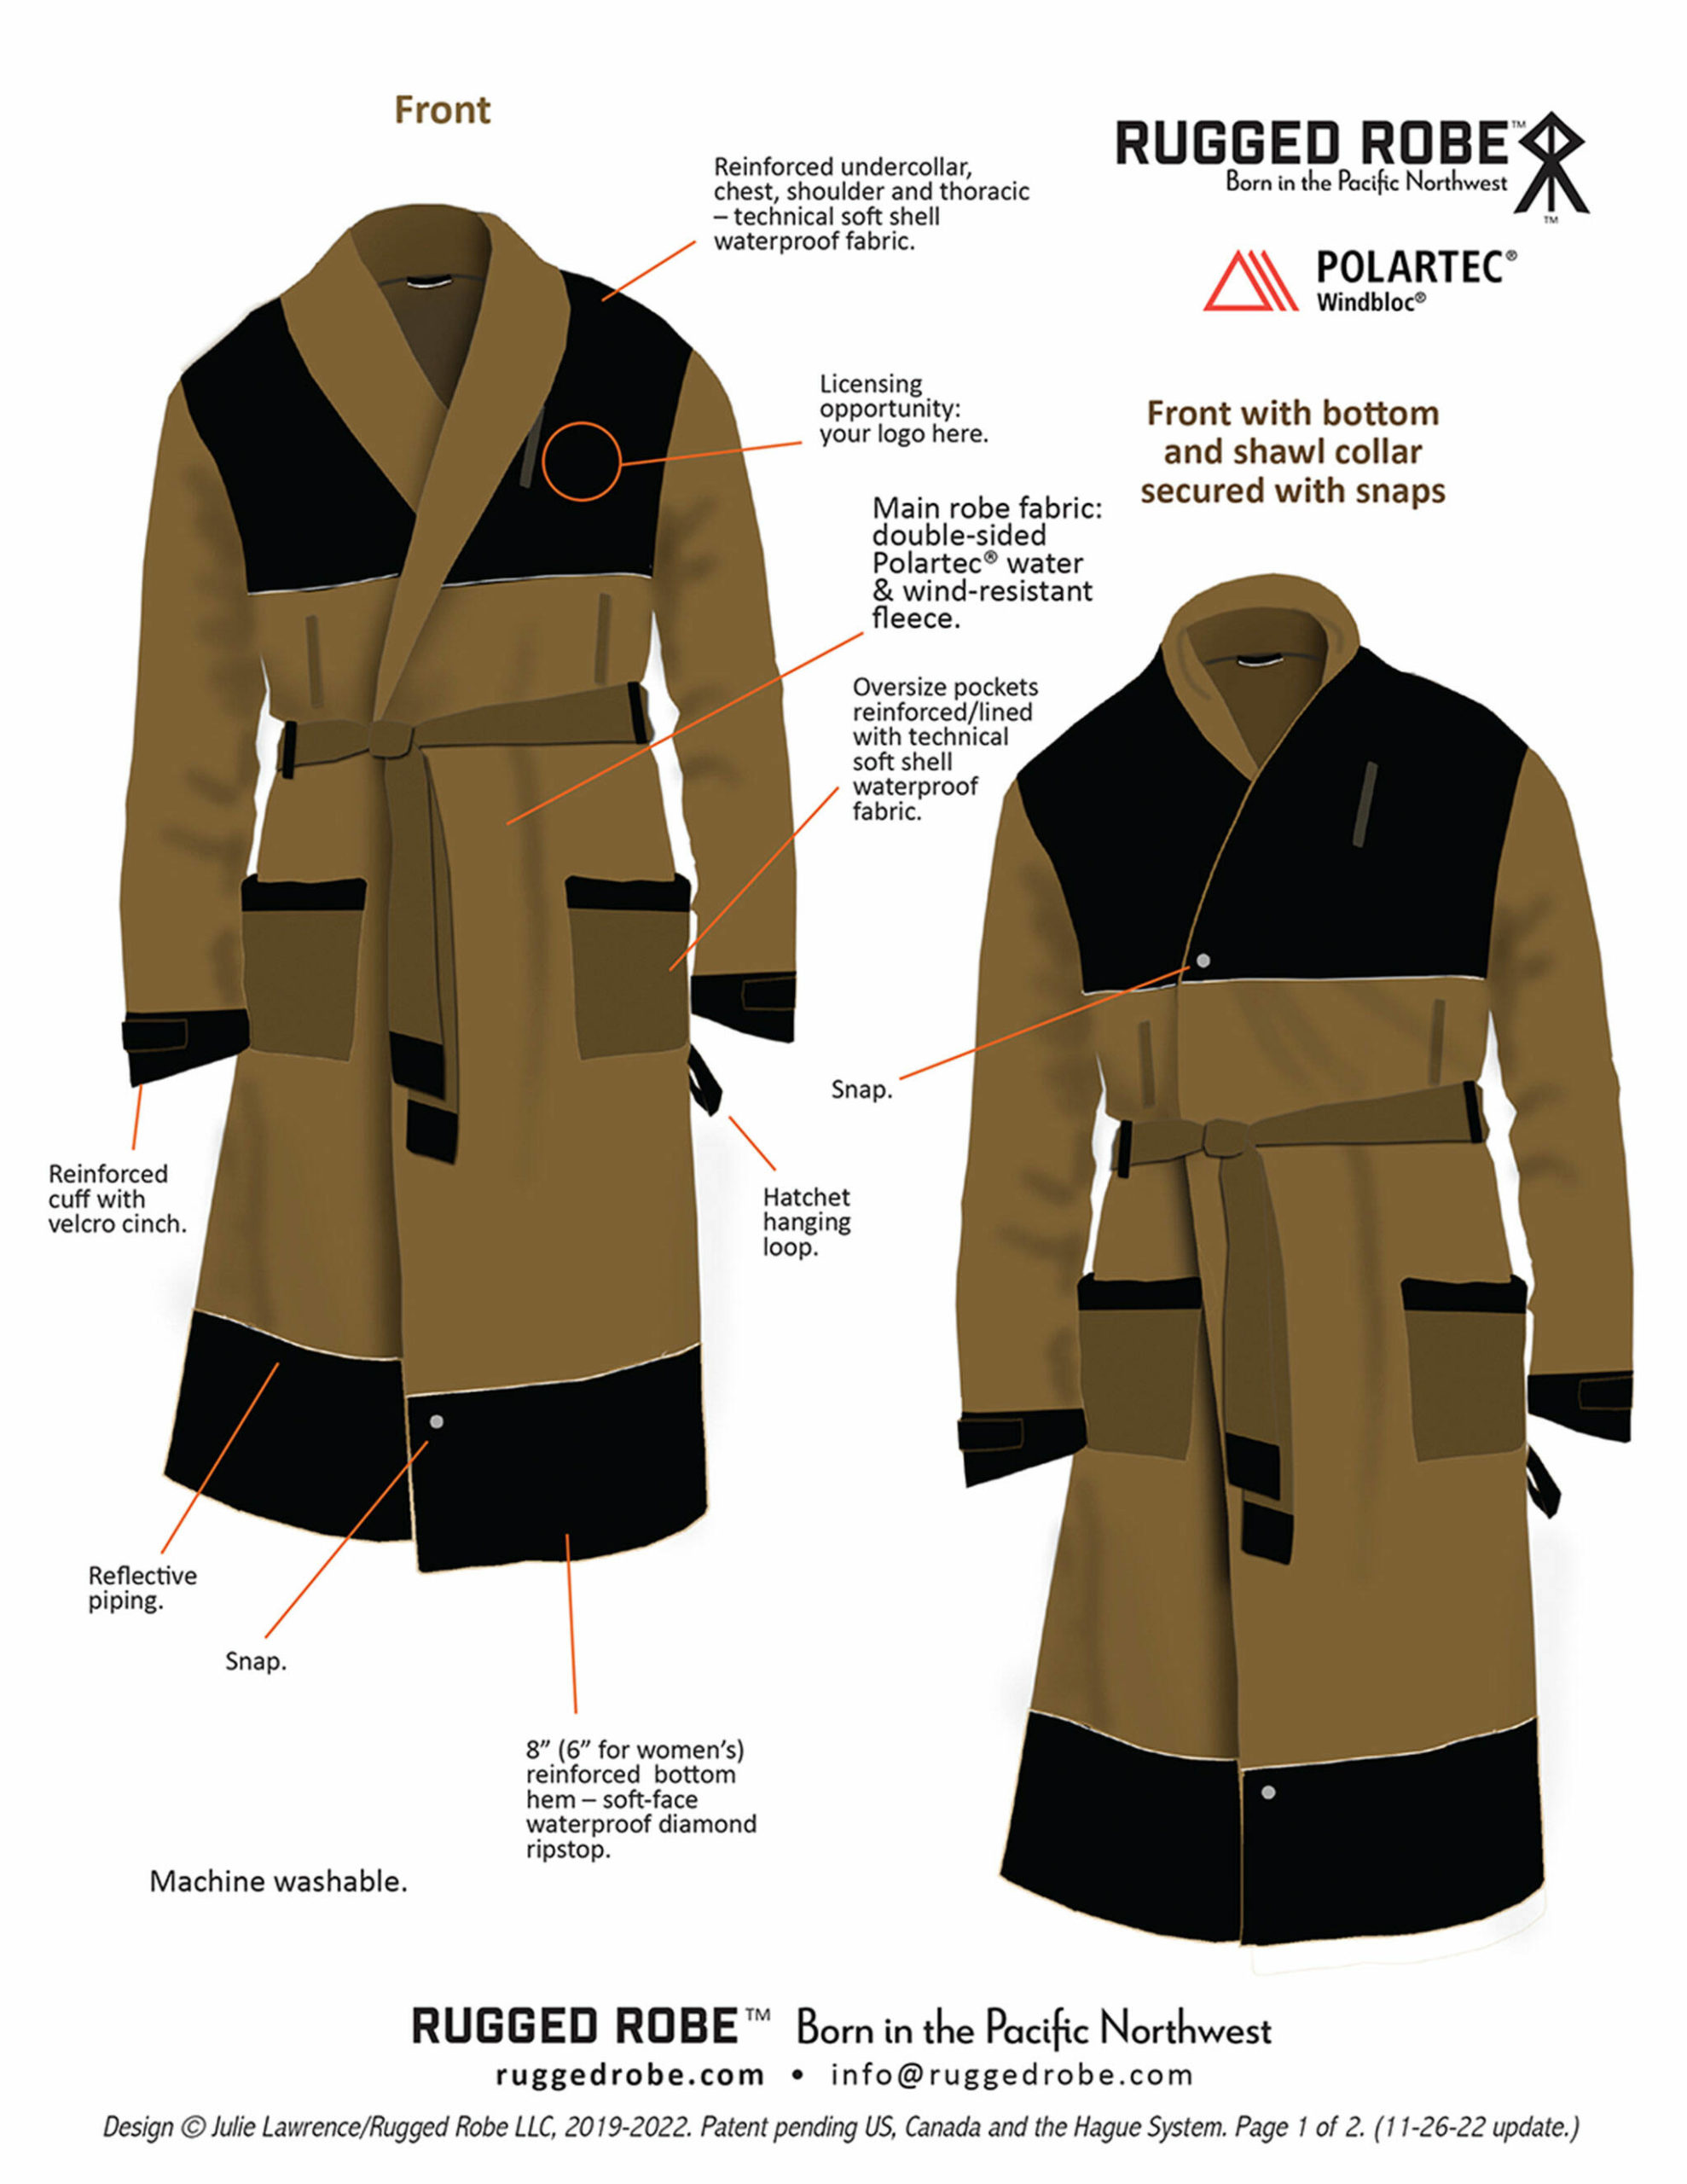 Photo courtesy of Rugged Robe/ Some of the features Rugged Robe Polartec Windbloc style include waterproof materials, snaps for the top and bottom of the opening, and ecologically-minded materials.